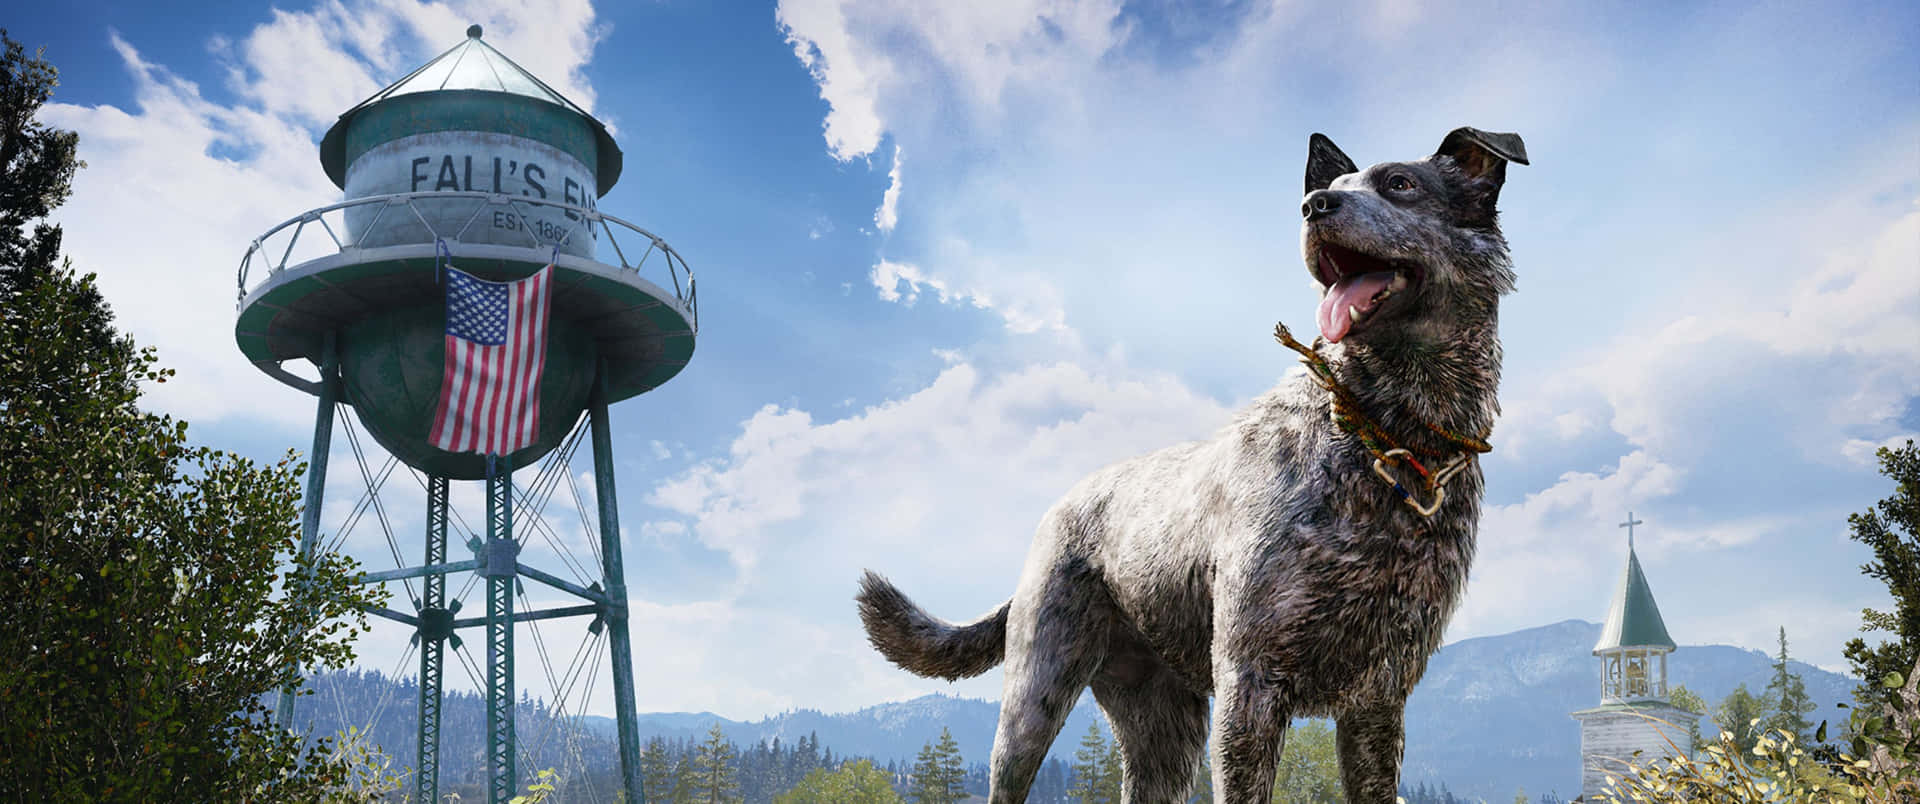 Embrace the beauty of Far Cry 5's open world